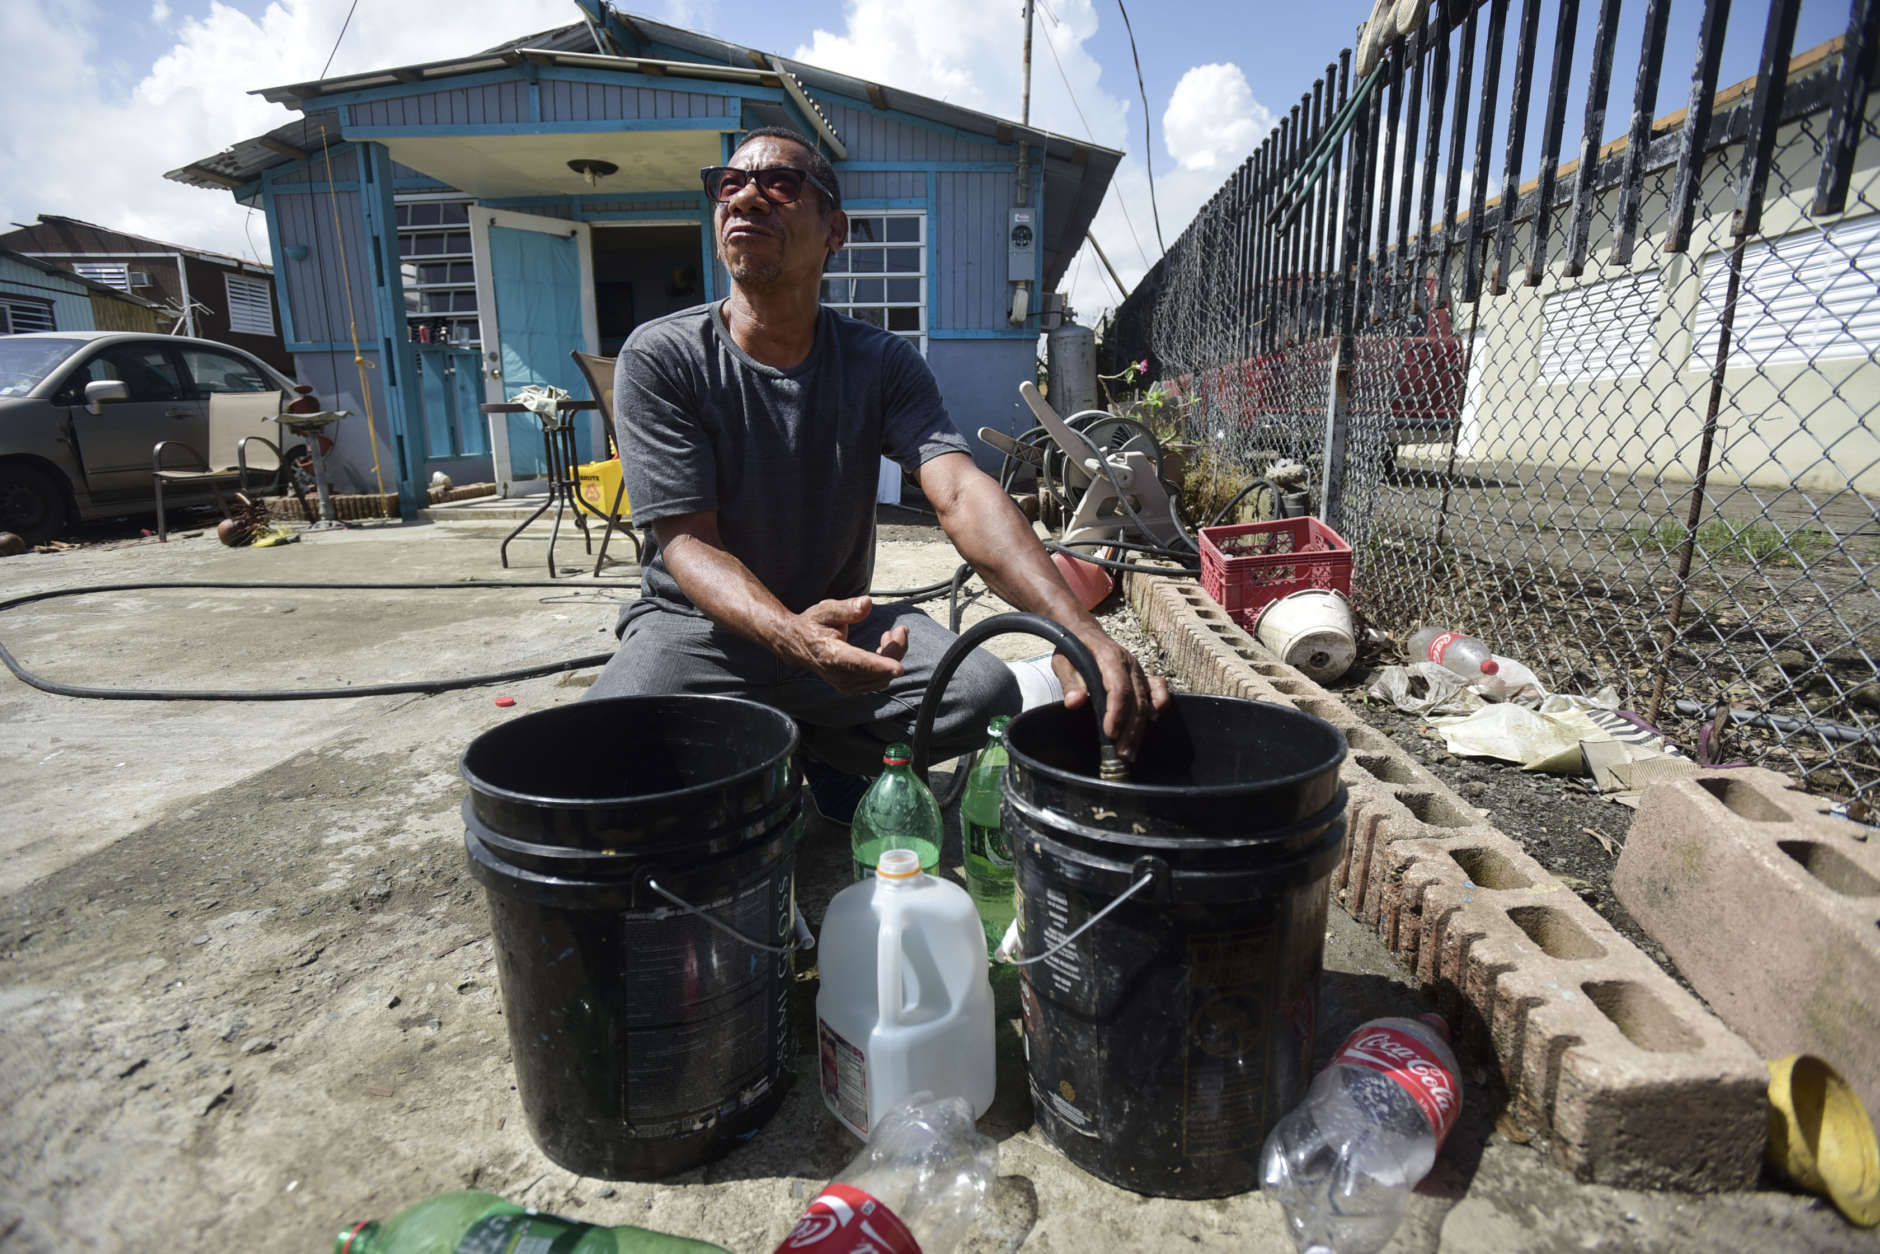 Toa Alta resident Jose Ramos fills buckets with water at a family member's home in the Juana Matos community one week after Hurricane Maria hit Catano, Puerto Rico, Thursday, Sept. 28, 2017. The aftermath of the powerful storm has resulted in a near-total shutdown of the U.S. territory’s economy that could last for weeks and has many people running seriously low on cash and worrying that it will become even harder to survive on this storm-ravaged island. (AP Photo/Carlos Giusti)